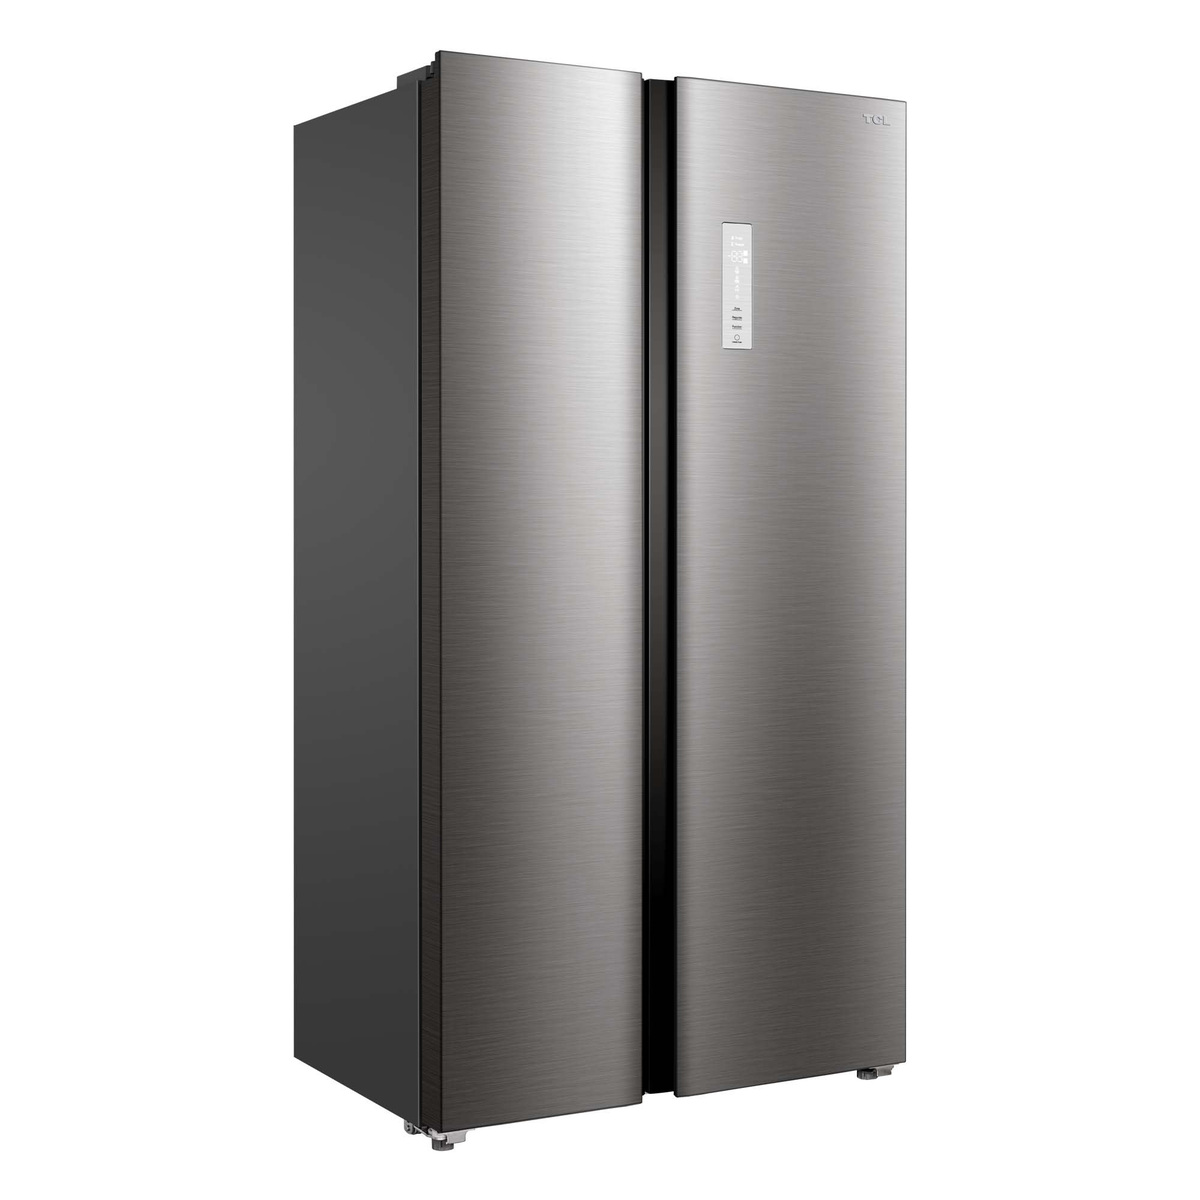 TCL Side by Side Refrigerator with Inverter Compressor, 635 L, Inox, P635SBSN